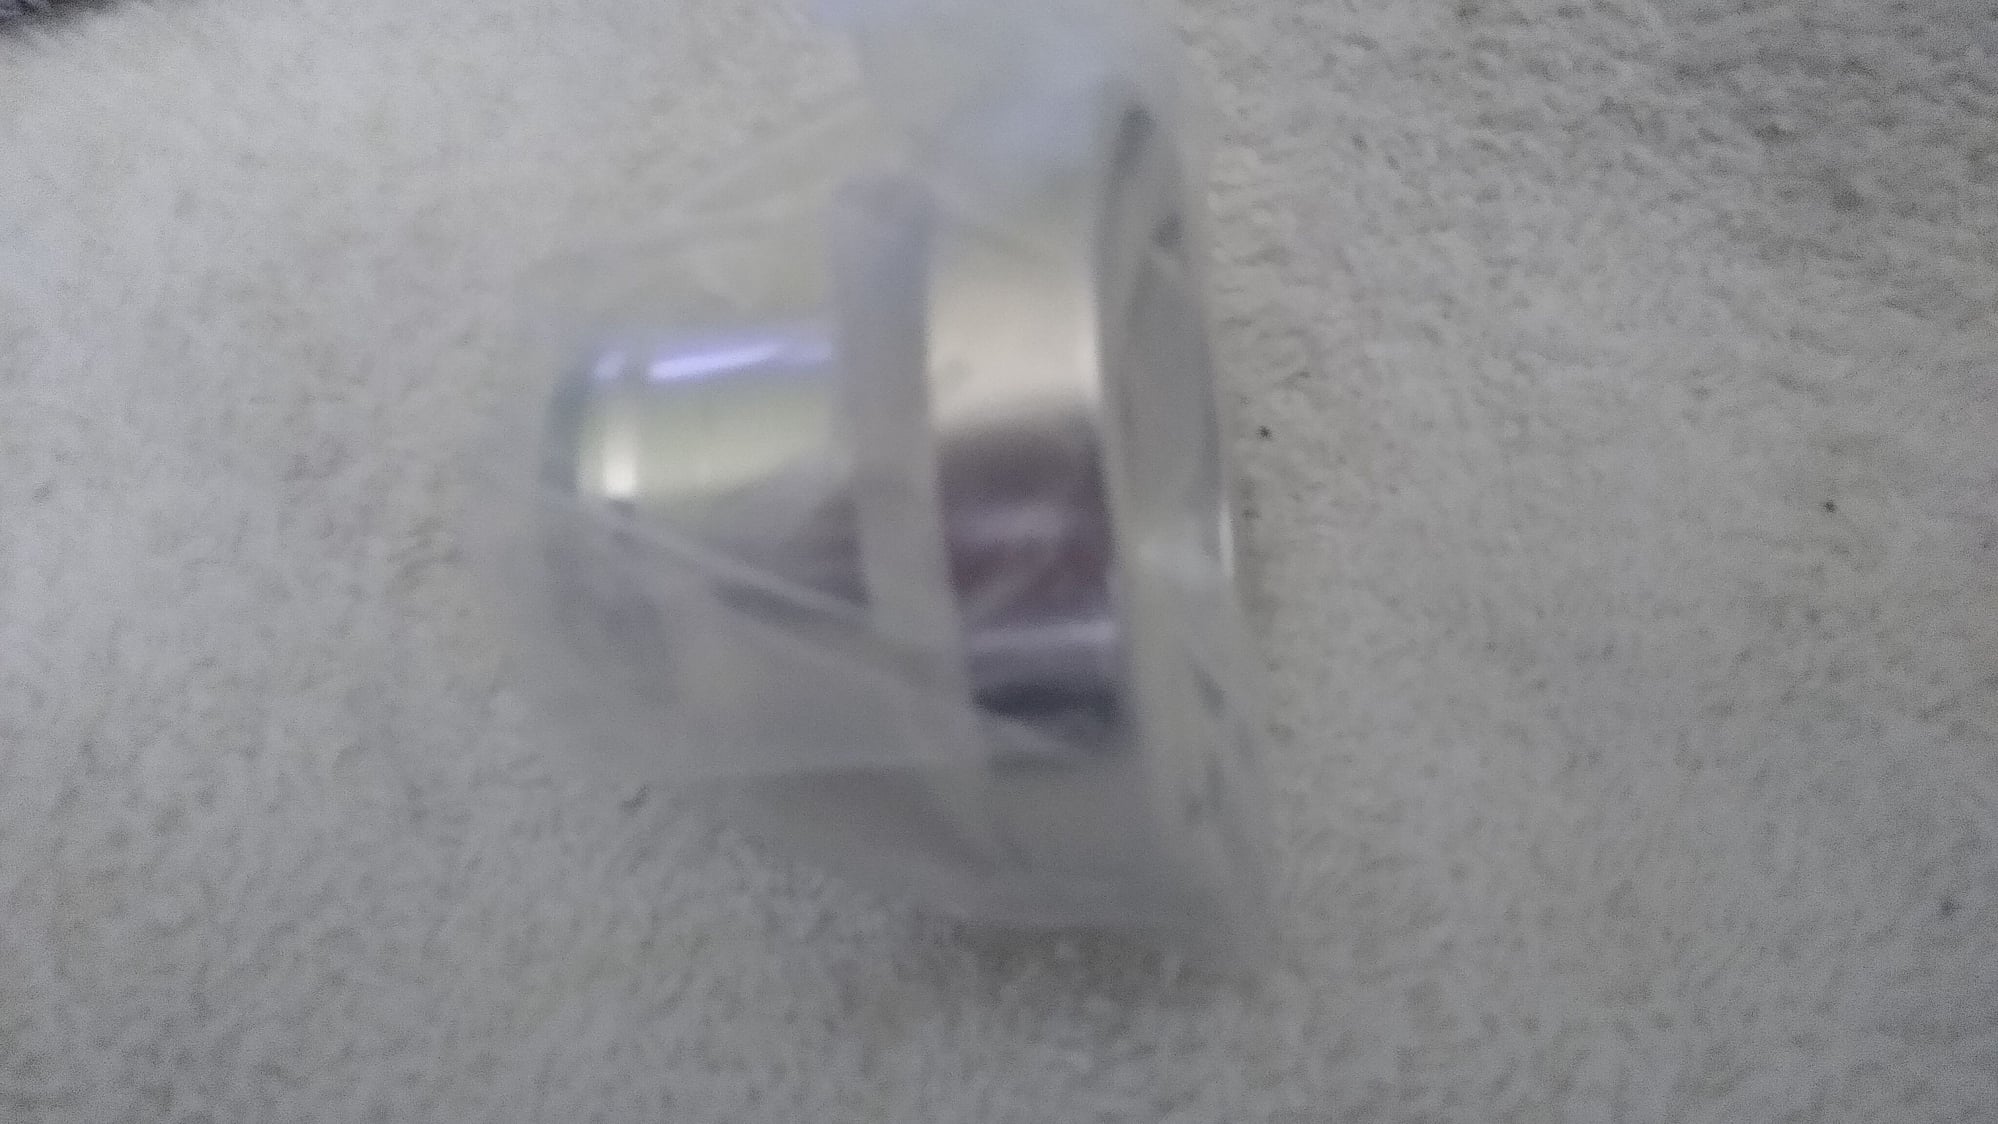 Miscellaneous - FD - Aftermarket Blow Off Valve - New - 1993 to 1995 Mazda RX-7 - San Jose, CA 95121, United States